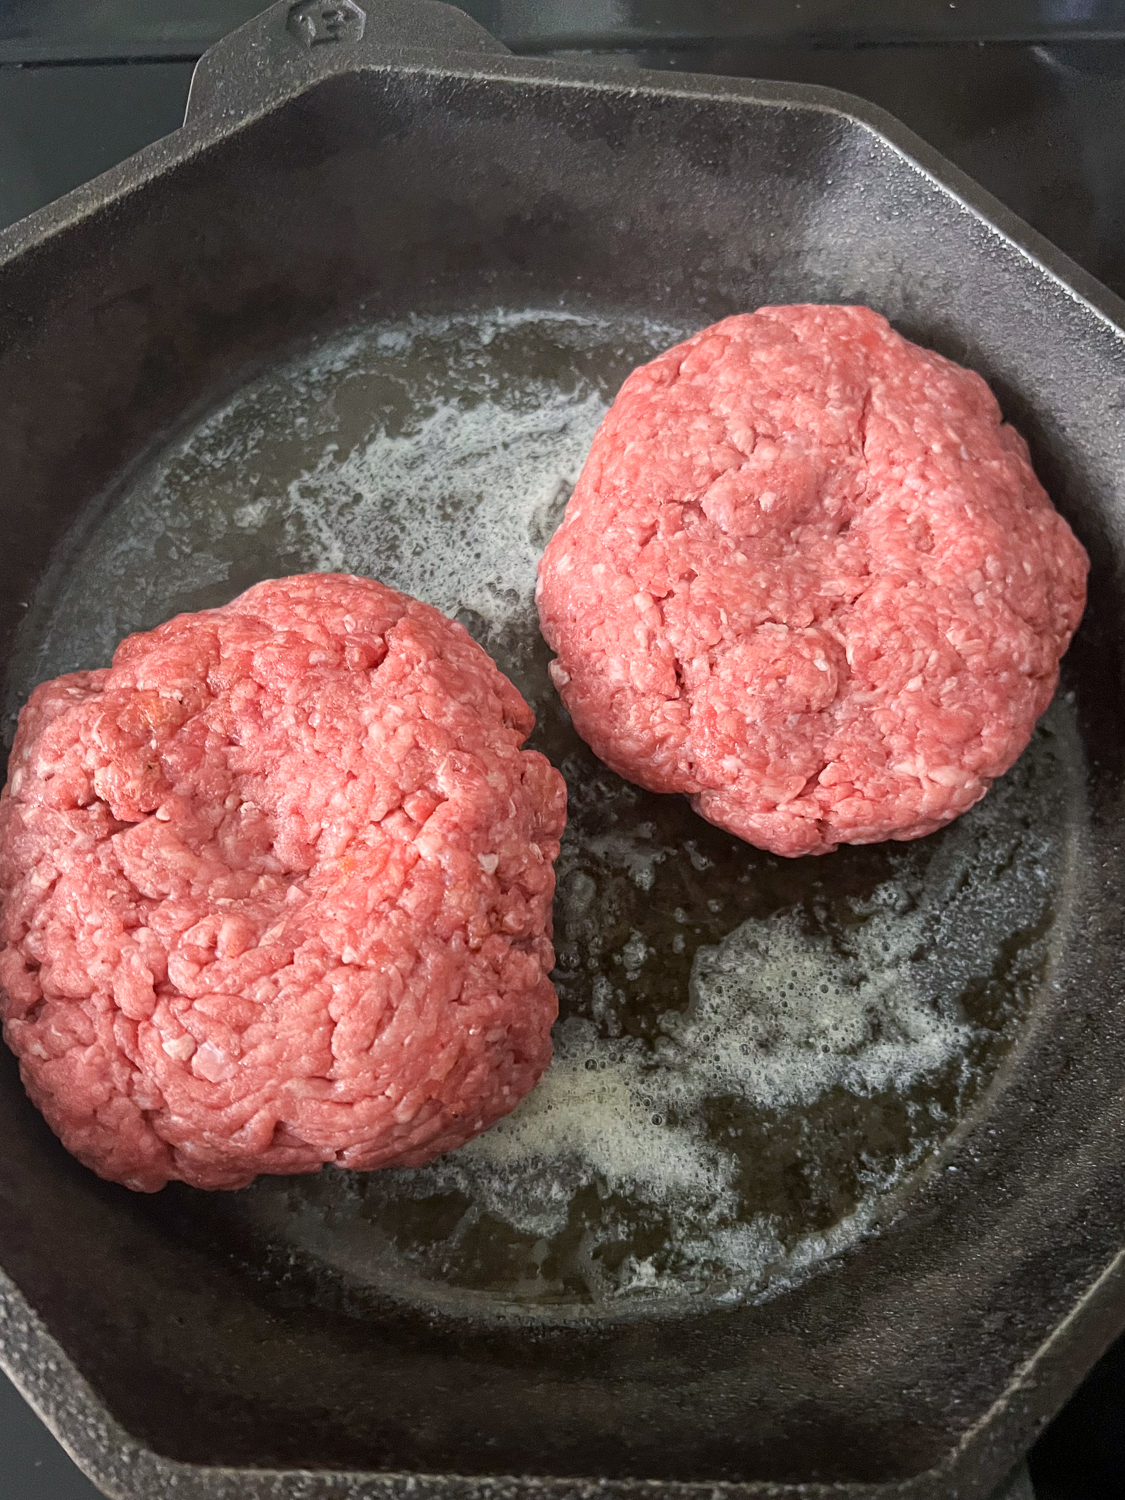 Two half pound patties placed in a cast iron skillet to sear.